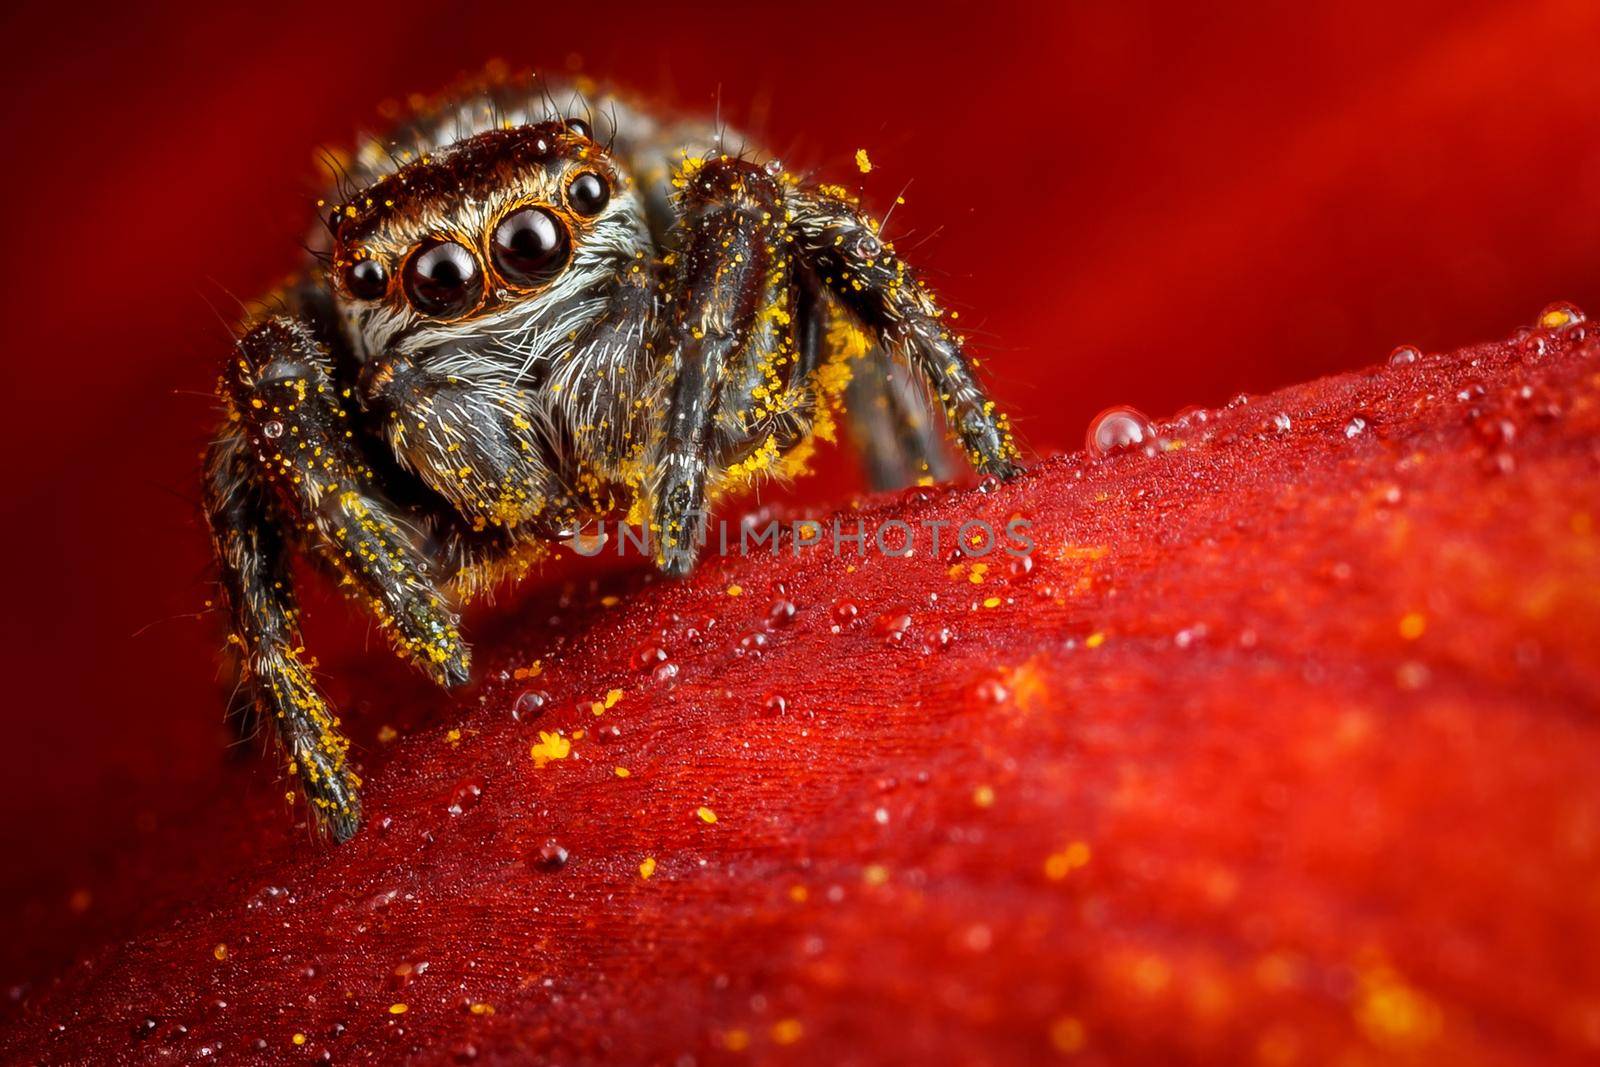 Jumping spider on a ruby red petal with dew drops by Lincikas